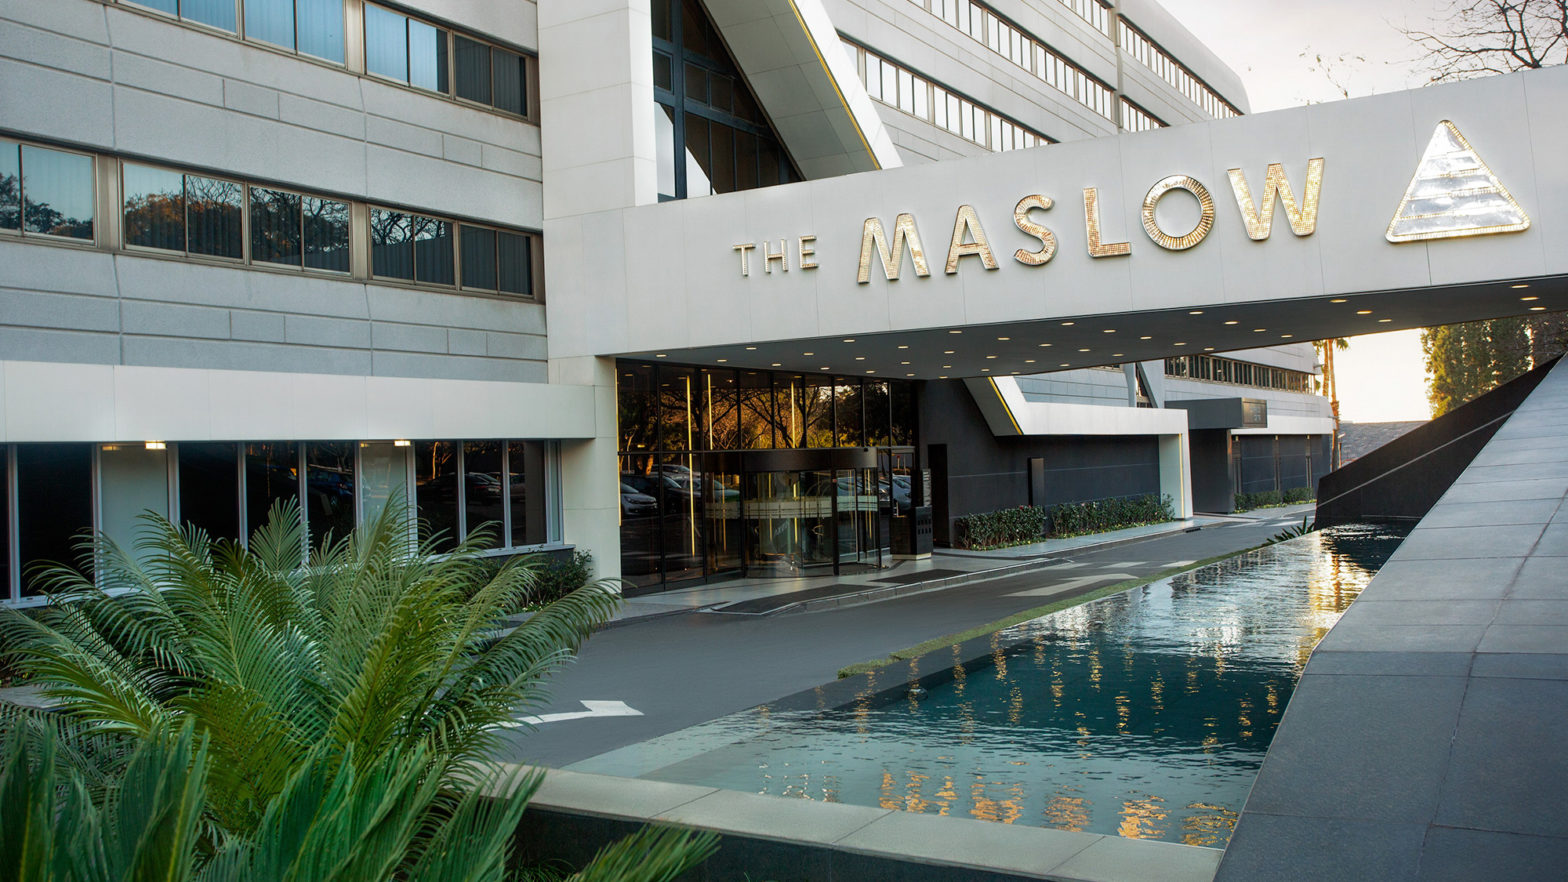 The Maslow Hotel